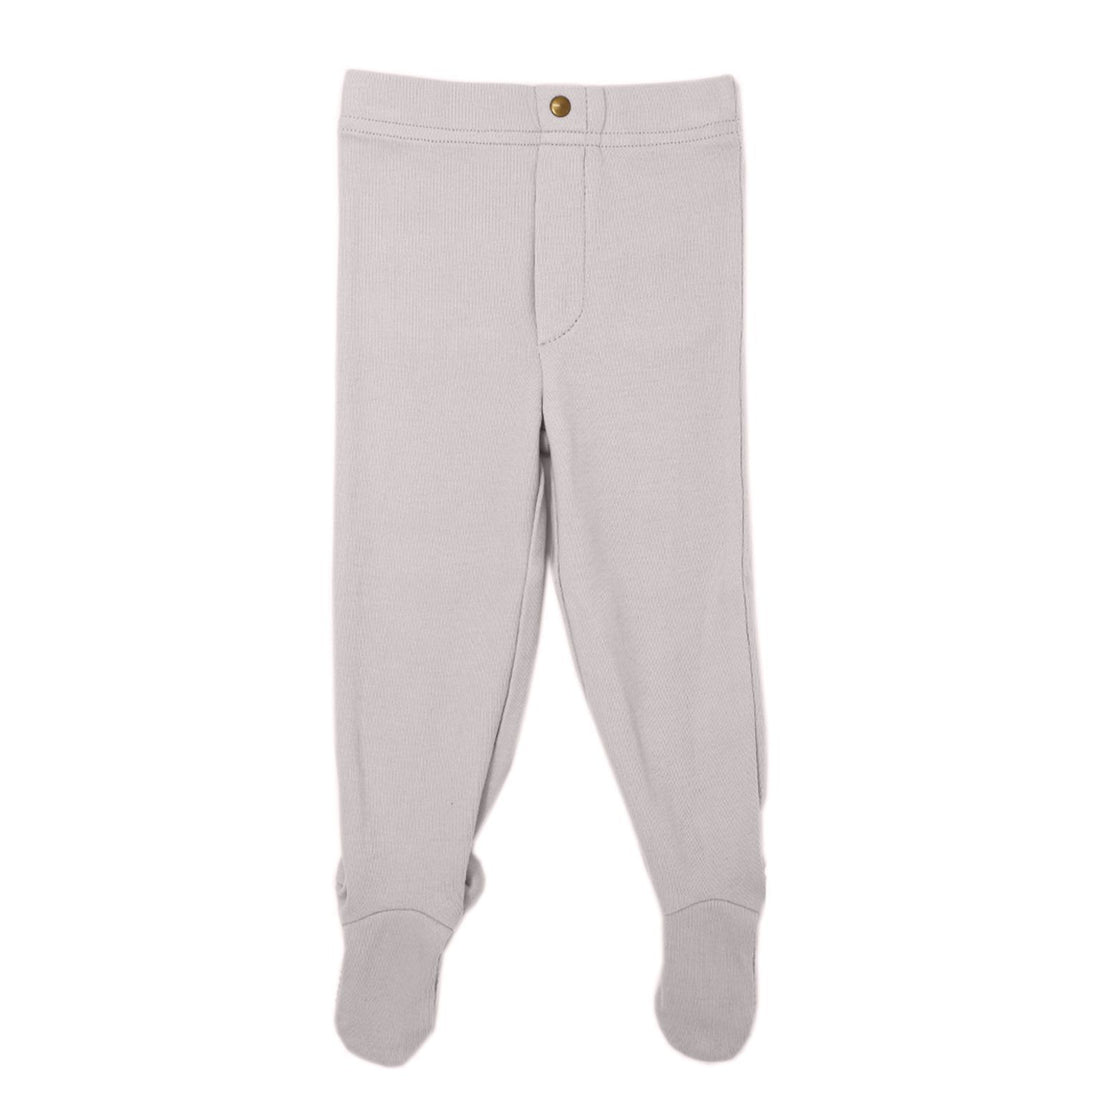 Organic Fog Gray Footed Pant-Bottoms-Loved Baby-0-3 M-Fog Gray-bluebird baby & kids